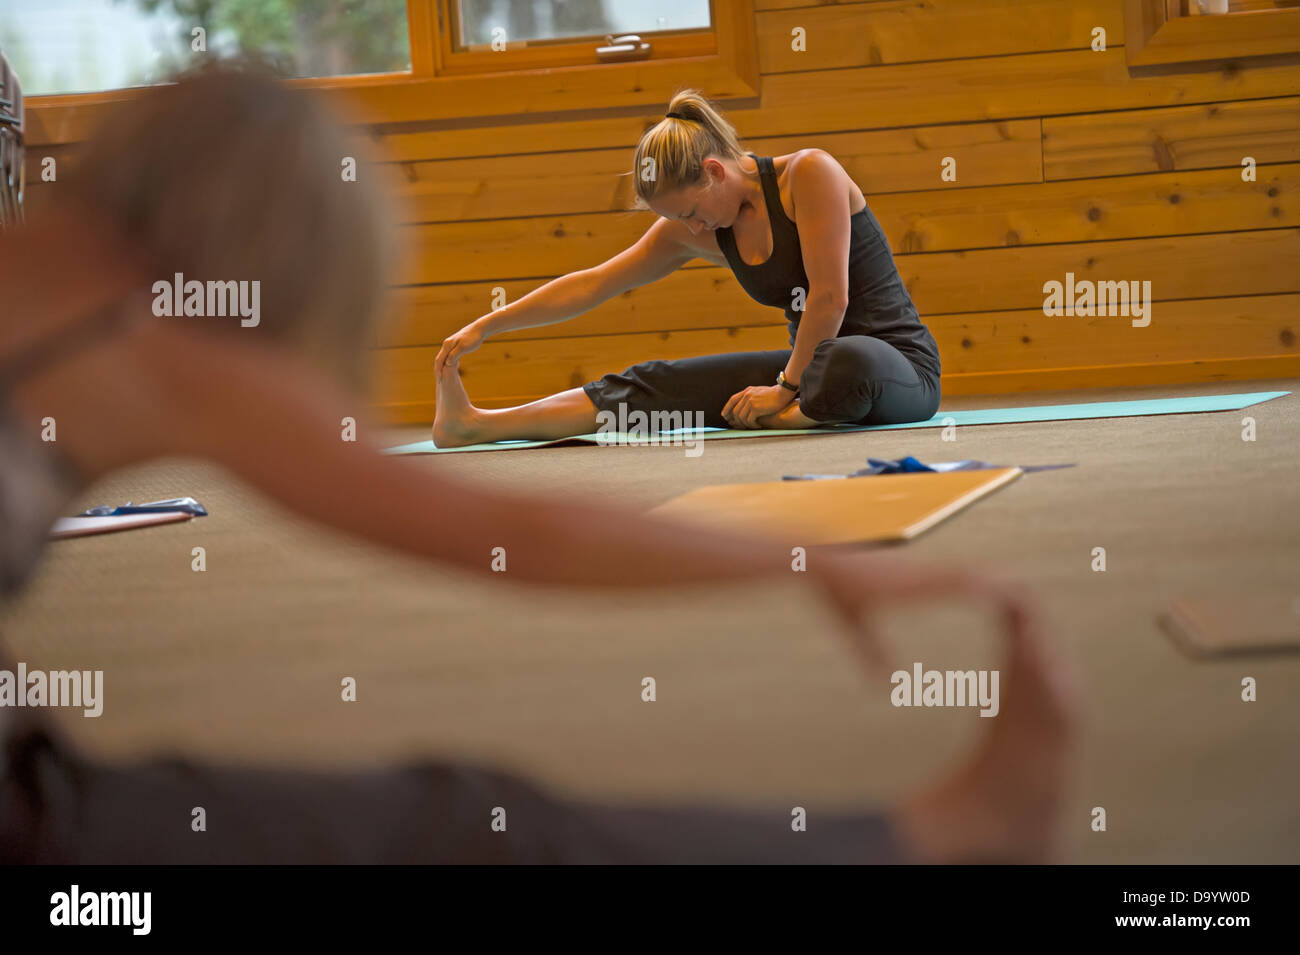 Yoga instuctor and student warm up. Stock Photo